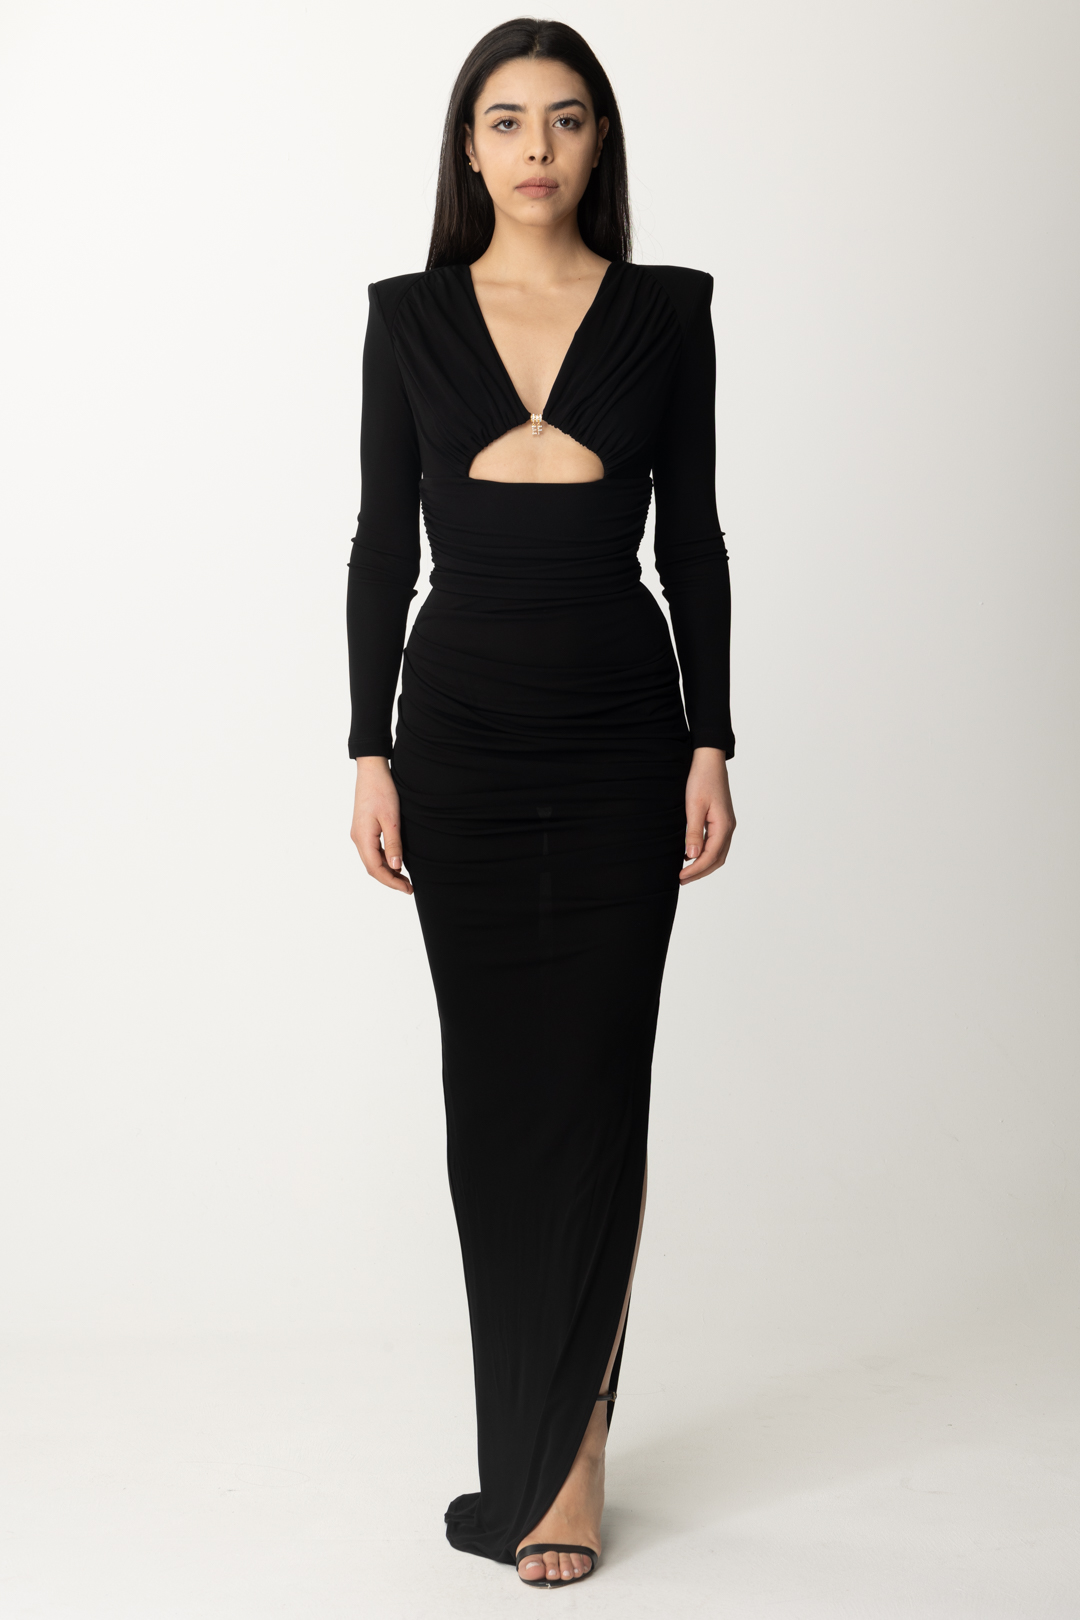 Preview: Elisabetta Franchi Draped Red Carpet Dress with Cut-Out Nero